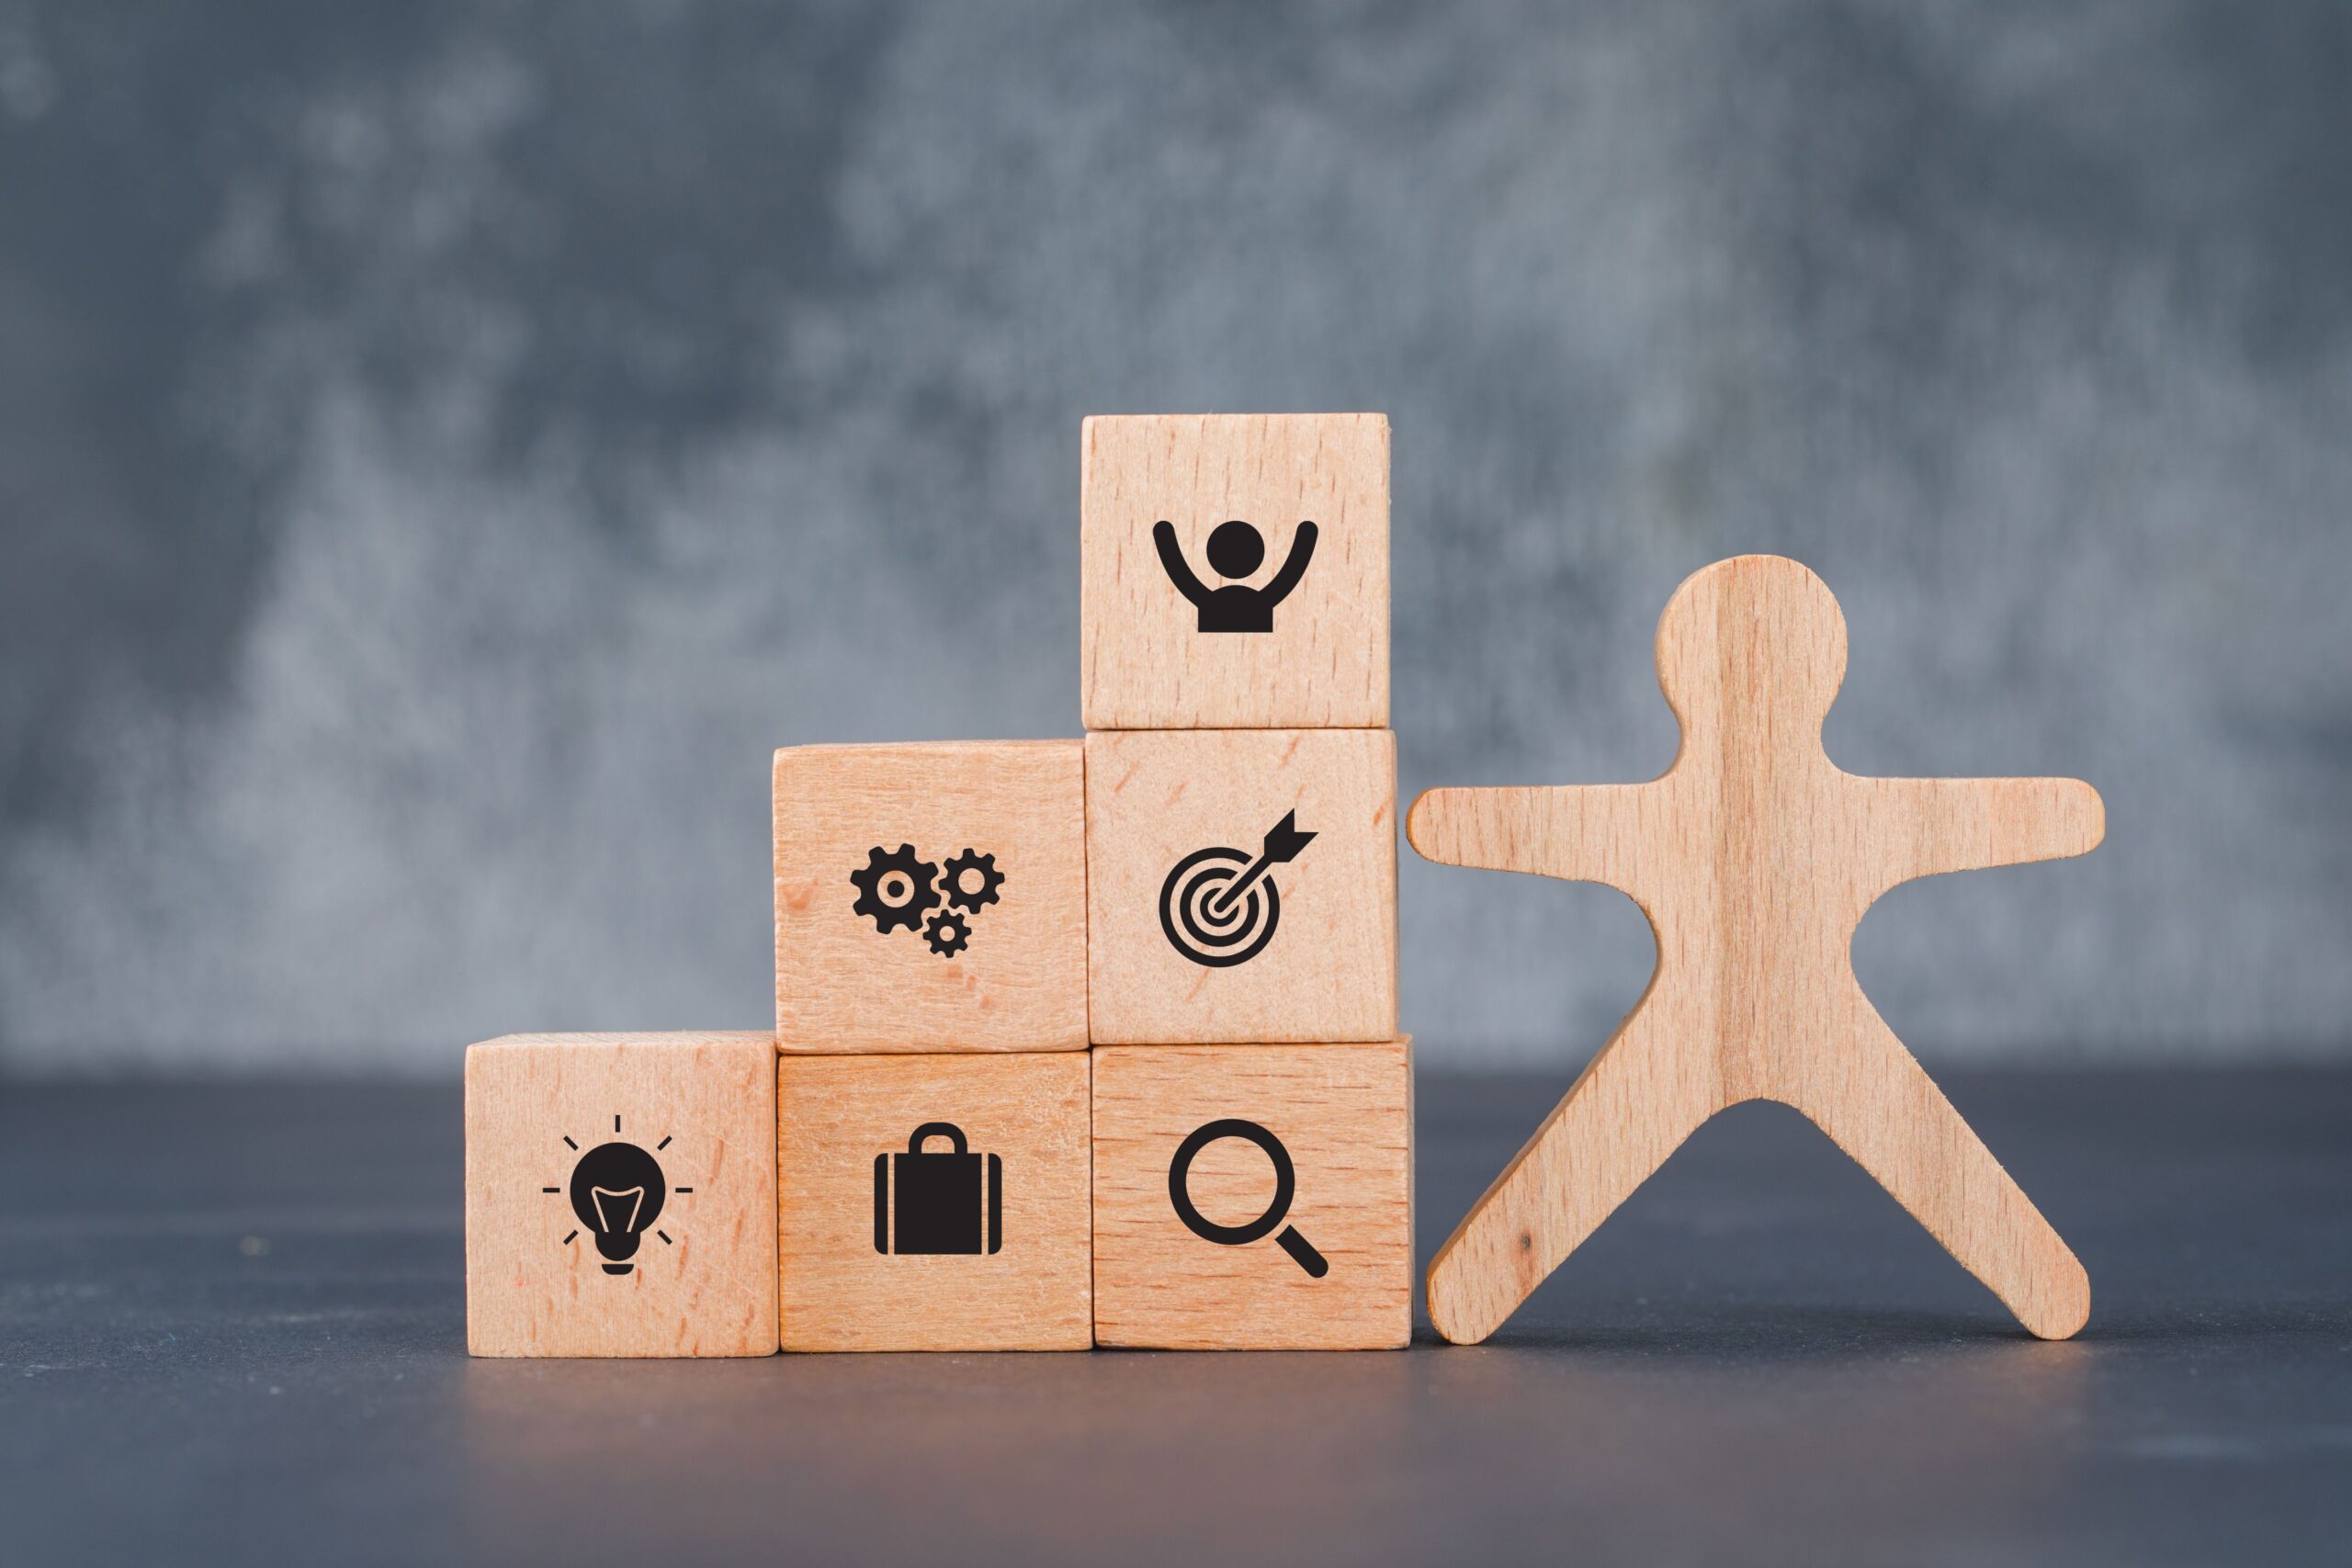 Six wooden blocks displaying business life icons near to a wooden human figure